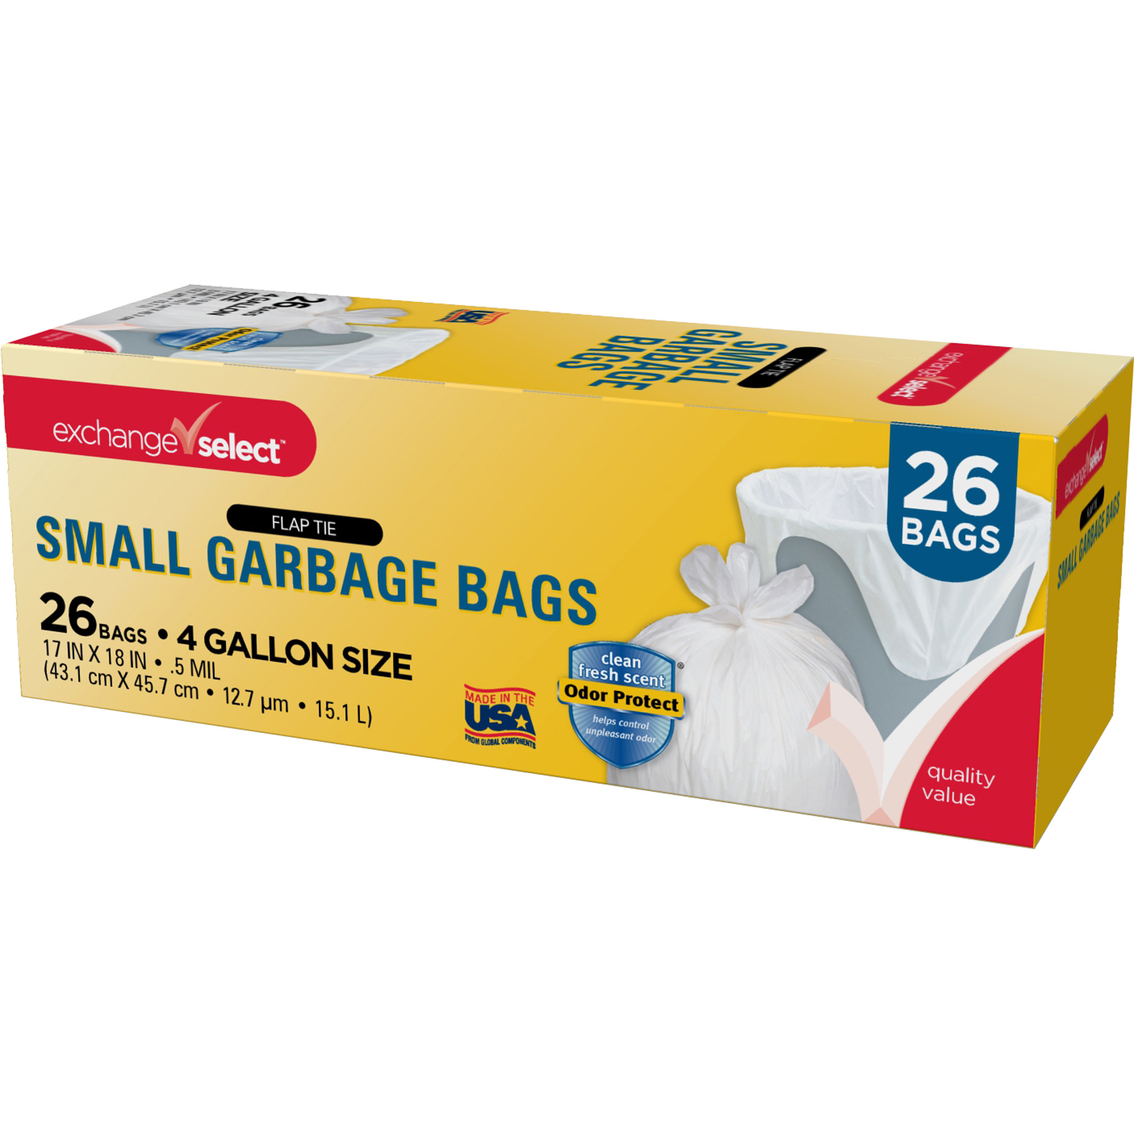 Exchange Select Small Garbage Bags 26 Ct., 4 Gal.